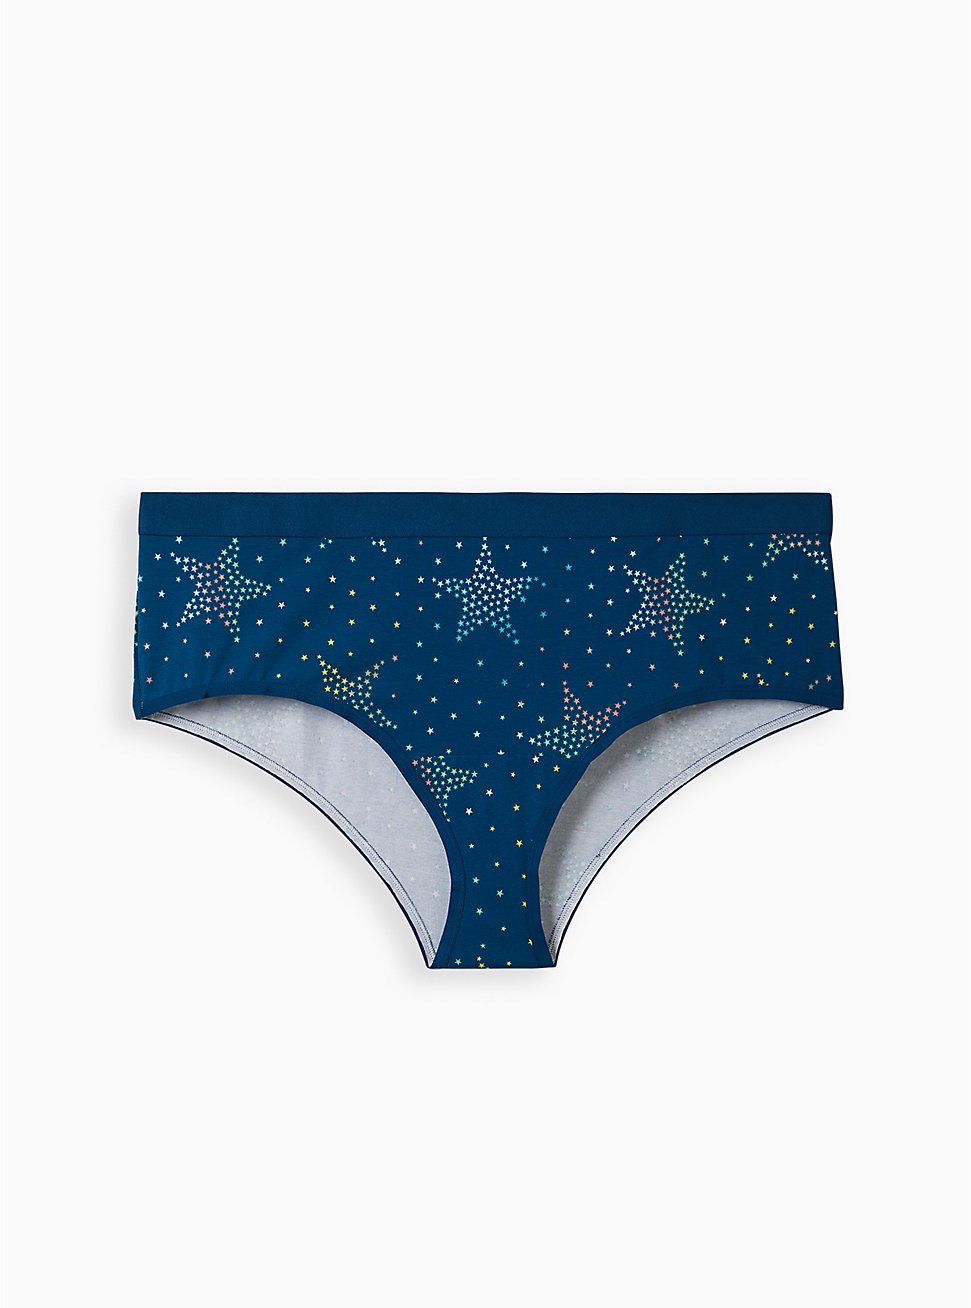 Plus Size Cheeky Panty - Stars Blue, GLOW STAR CLUSTERS, hi-res